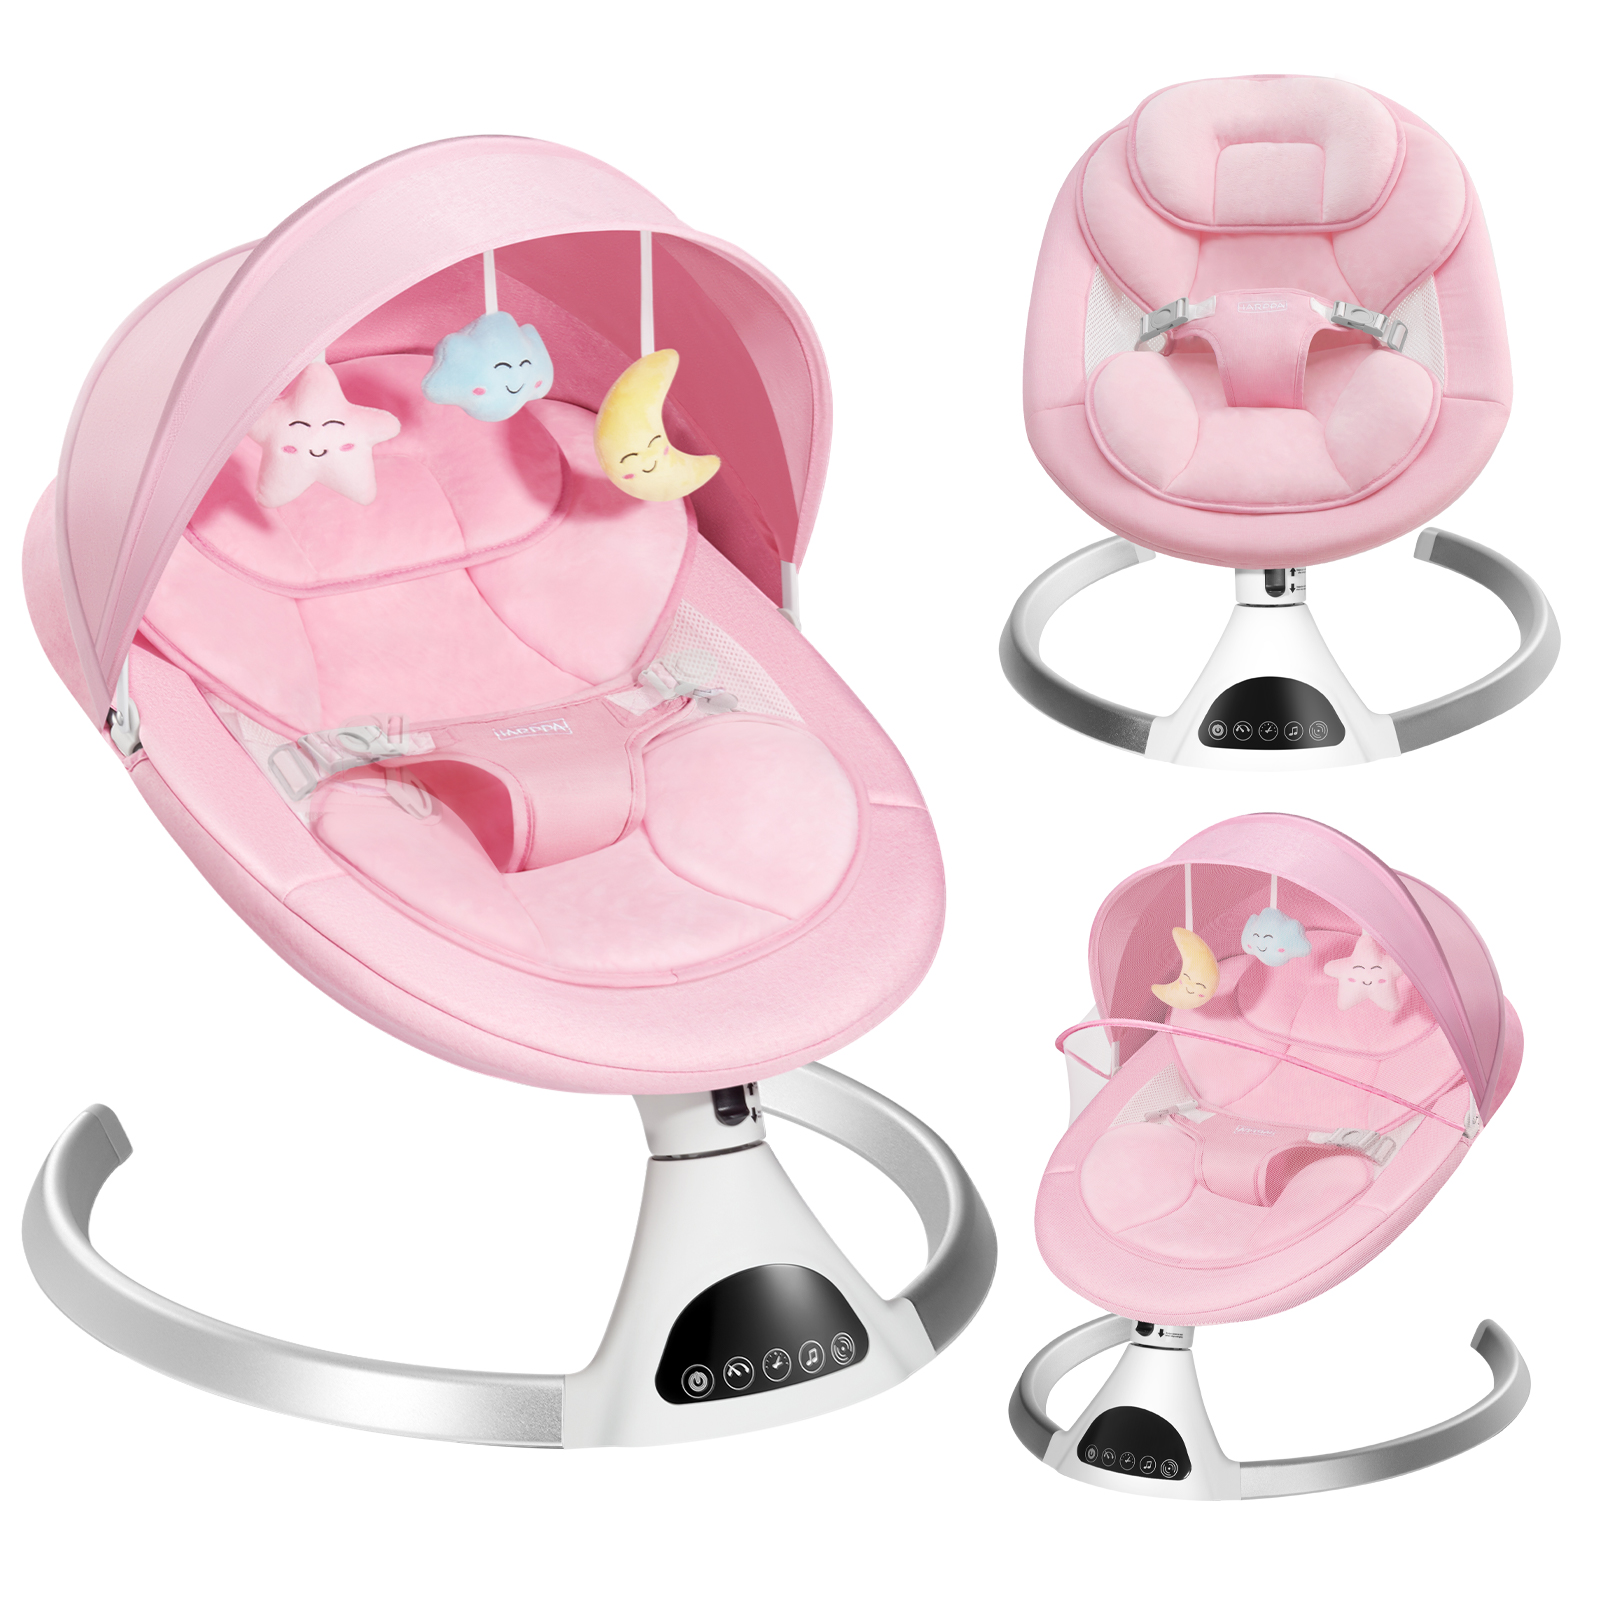 HARPPA Electric Baby Swing, Bluetooth Speaker, Remote Control, Pink - image 1 of 8